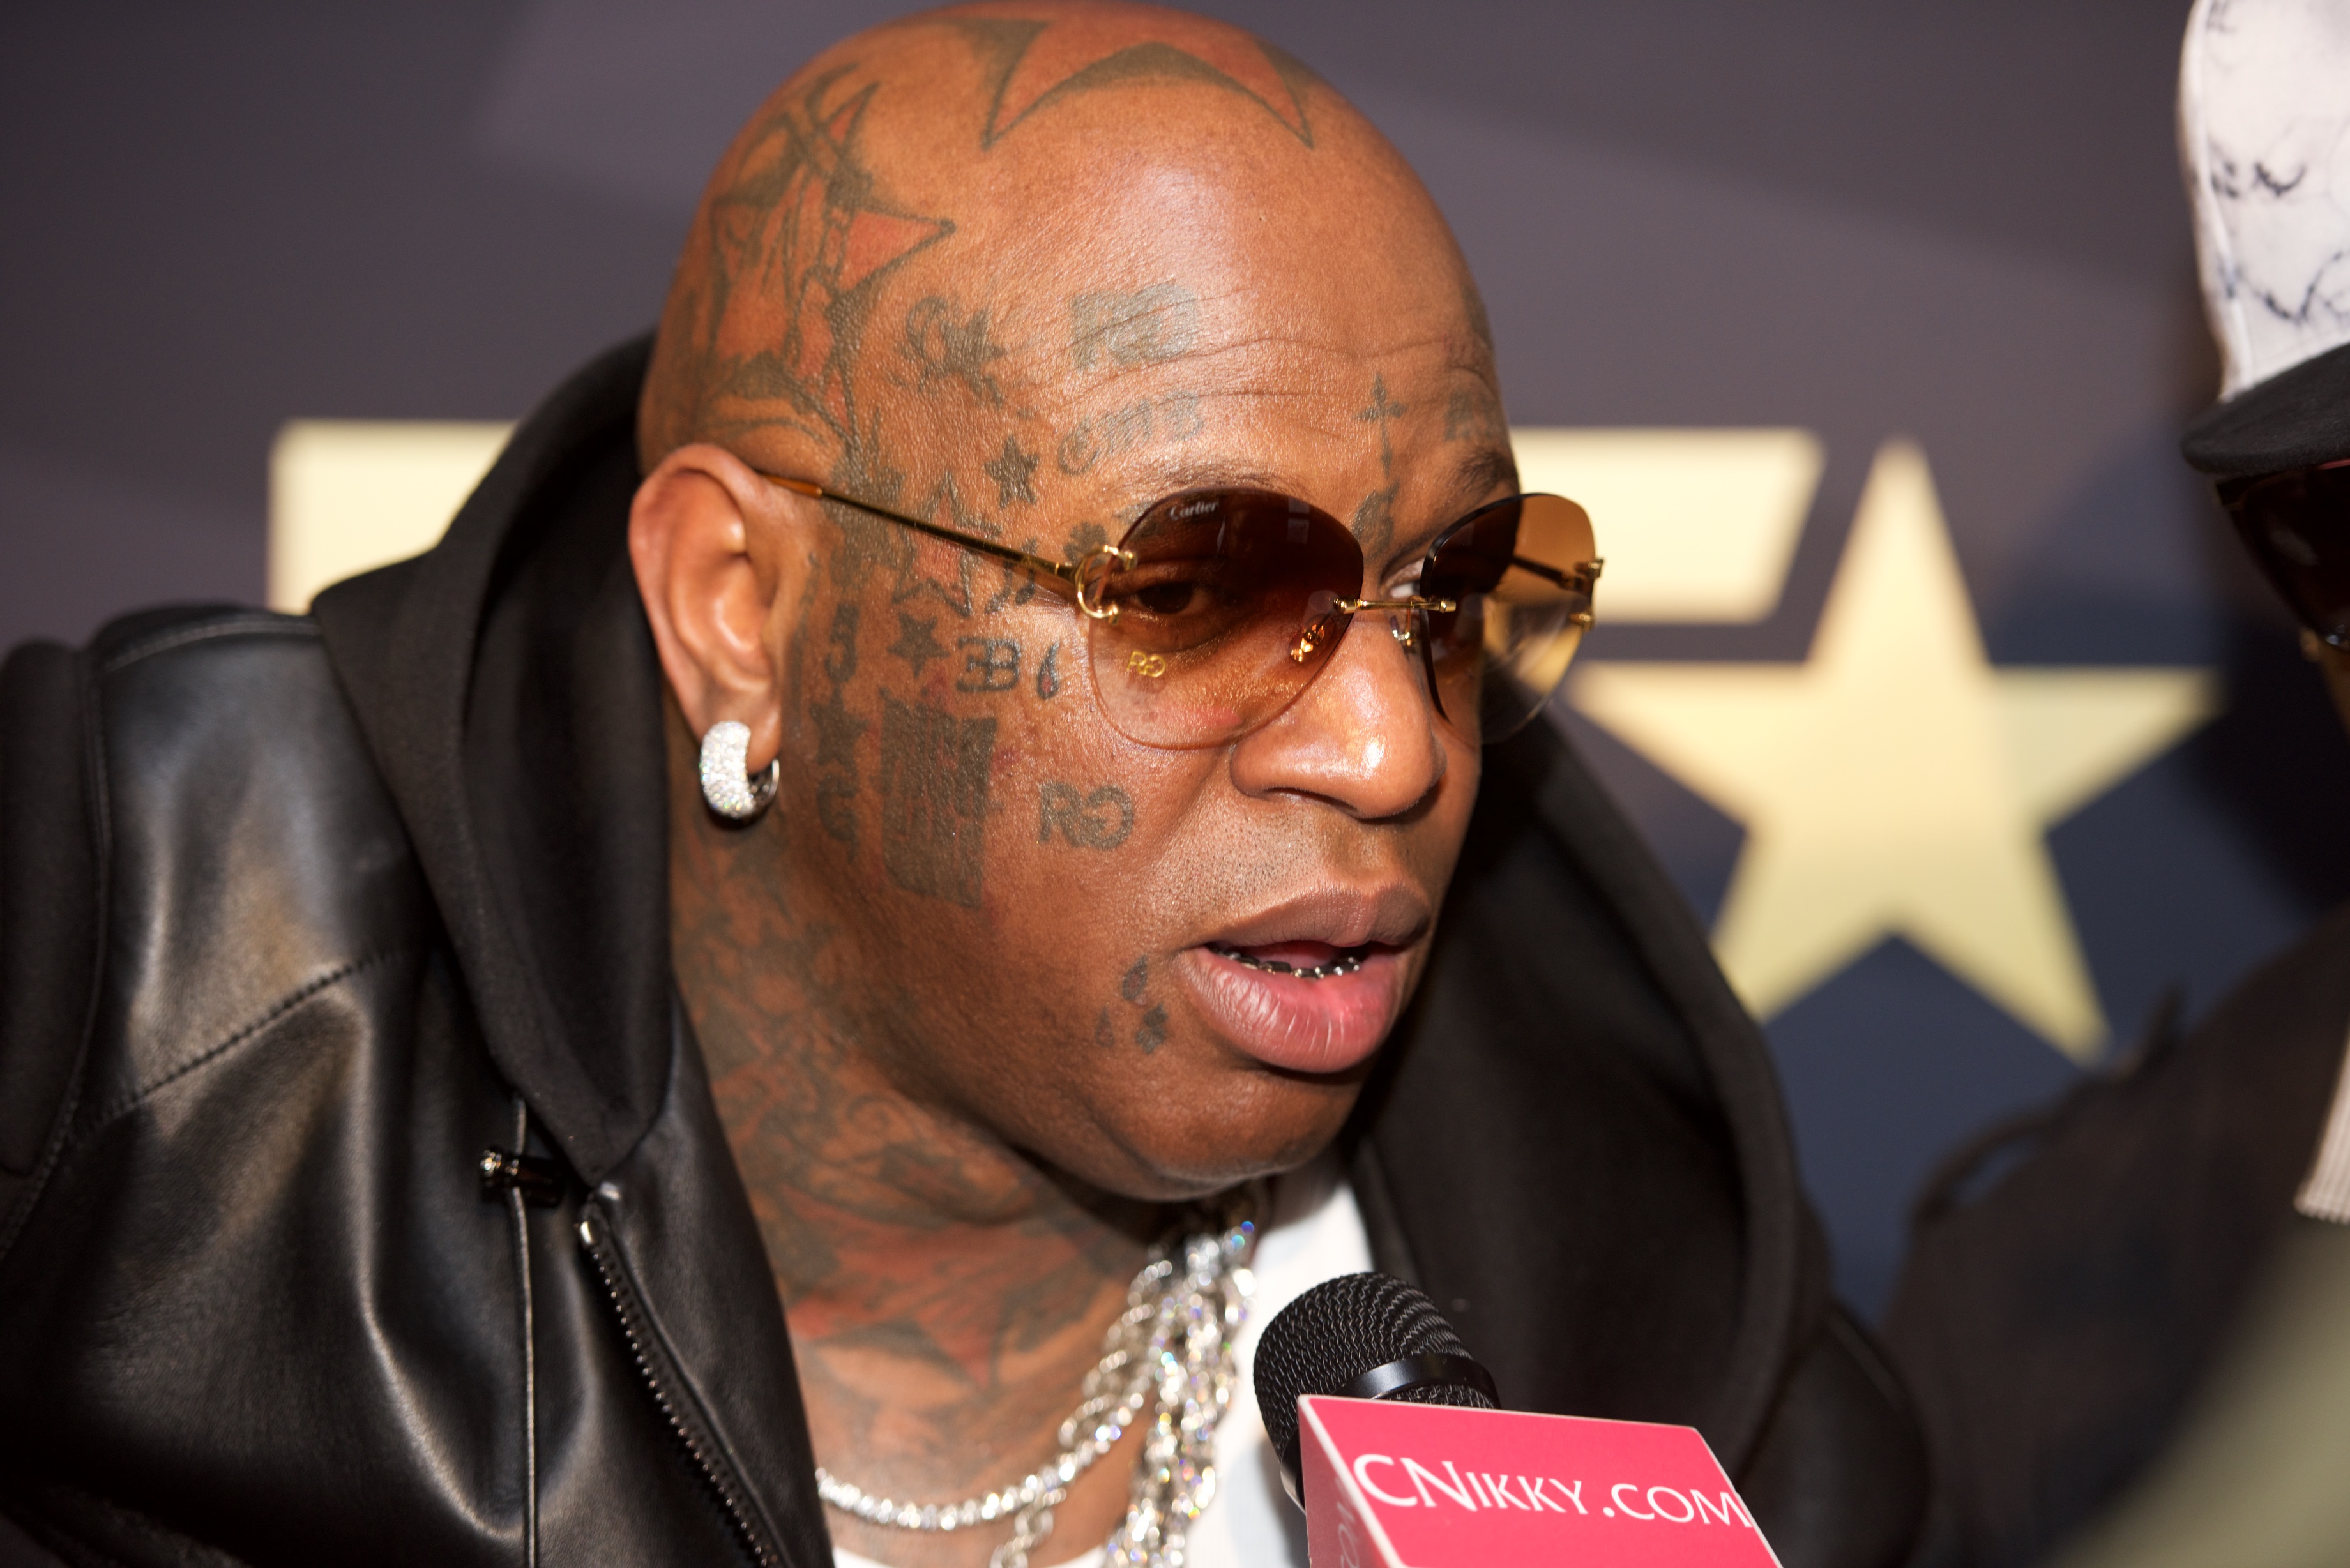 Birdman Wants Billboard To “Put Some Respek” On The CEOs: “I’m Tha Best To Ever Do It”